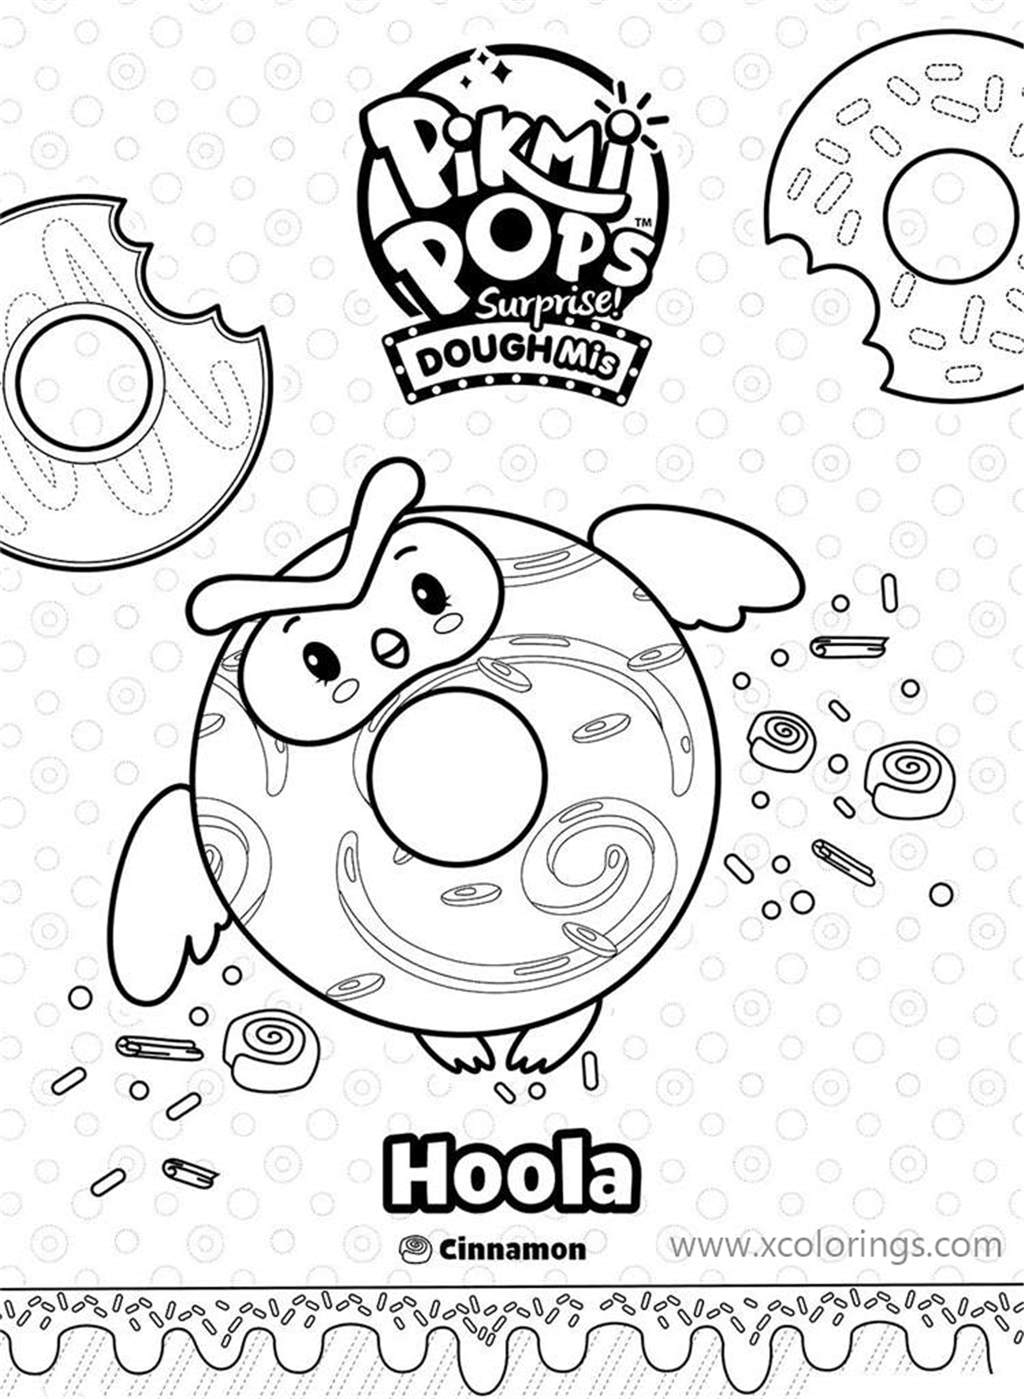 Free Pikmi Pops Coloring Pages Hoola The Owl printable